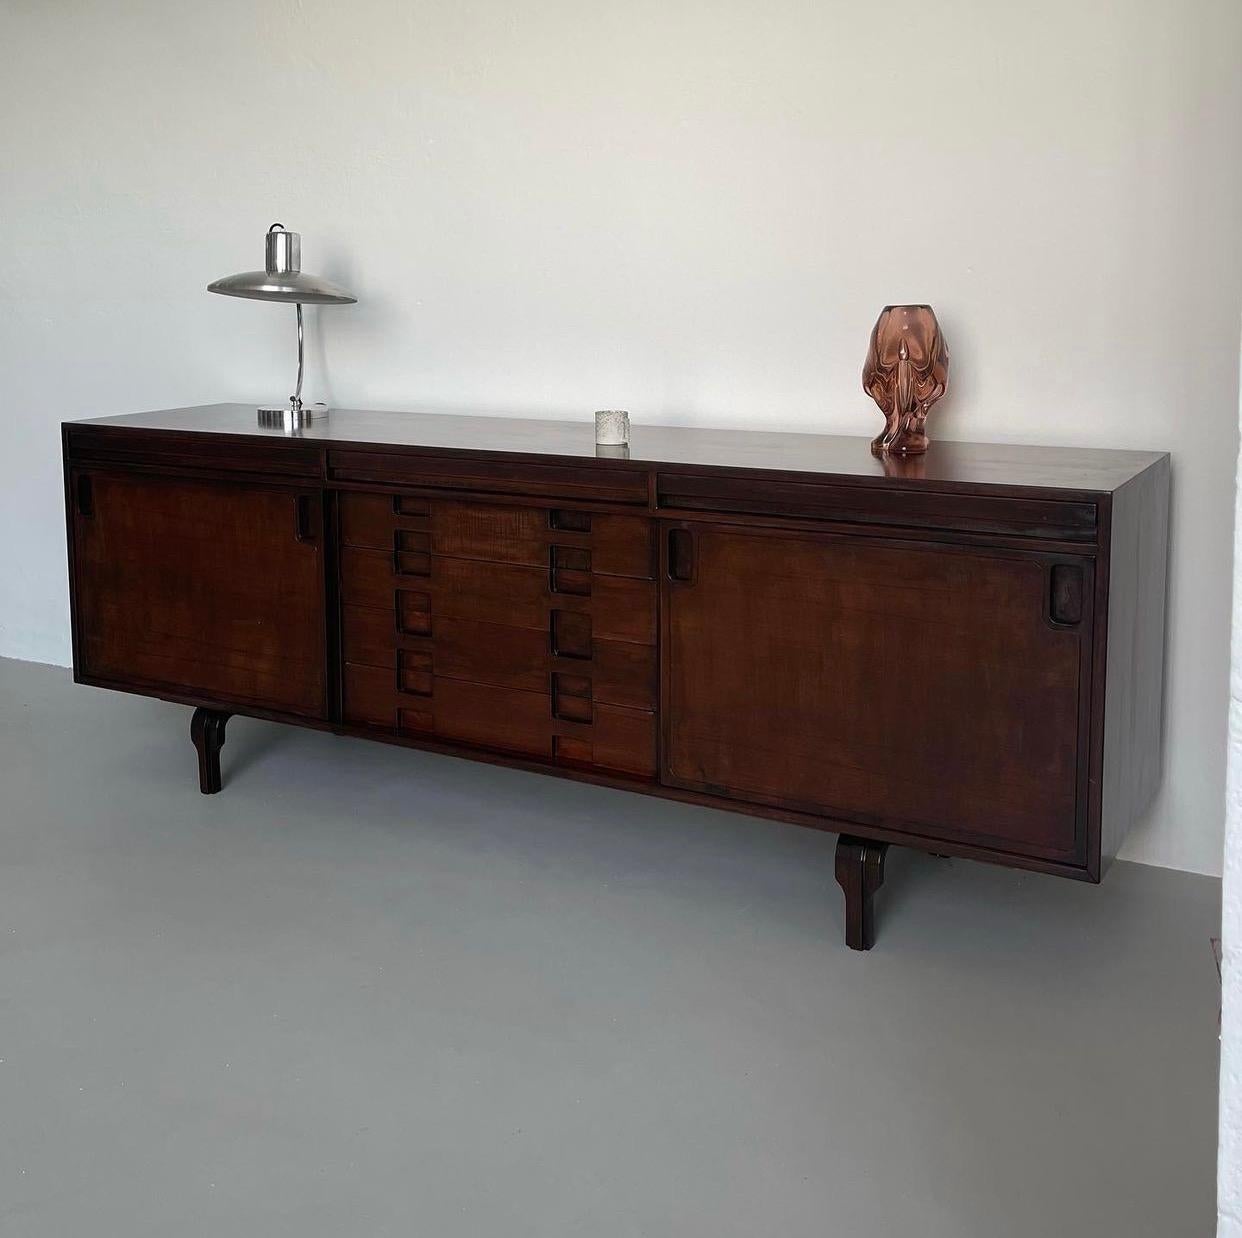 Vintage Italian Made Large Solid Wood Sideboard by Luciano Magri for Saporiti 2